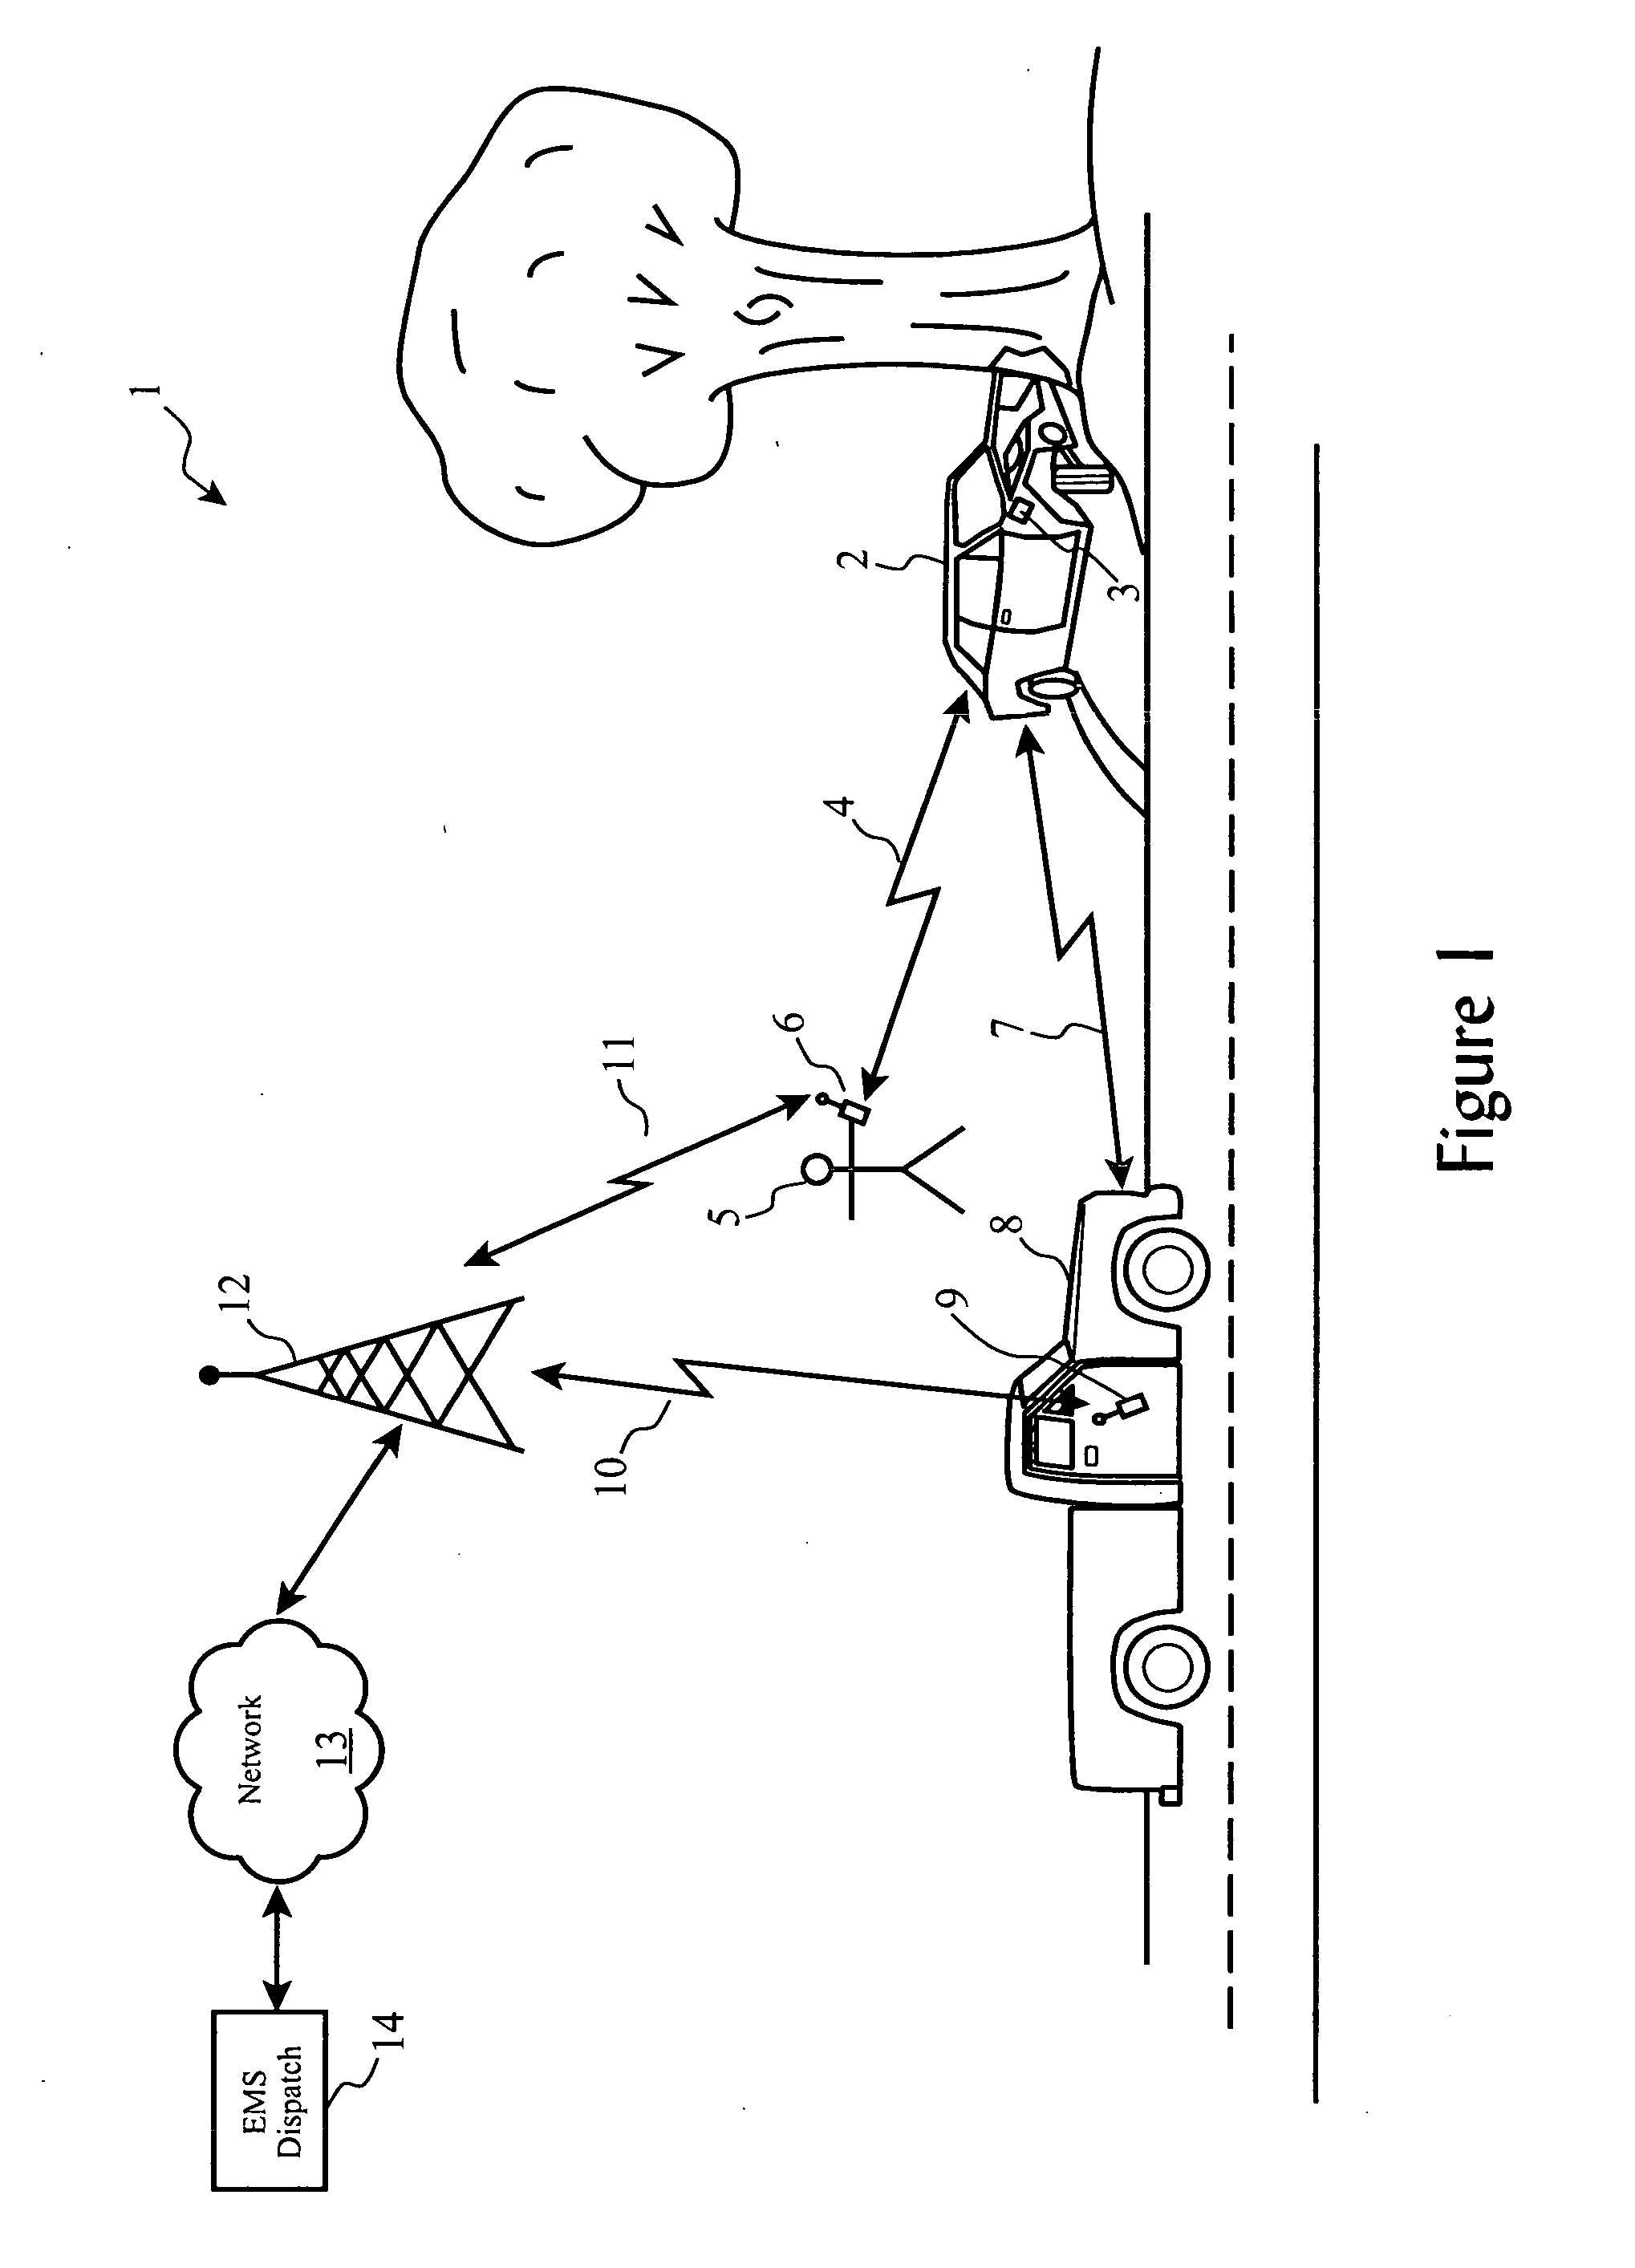 System for automatic wireless utilization of cellular telephone devices